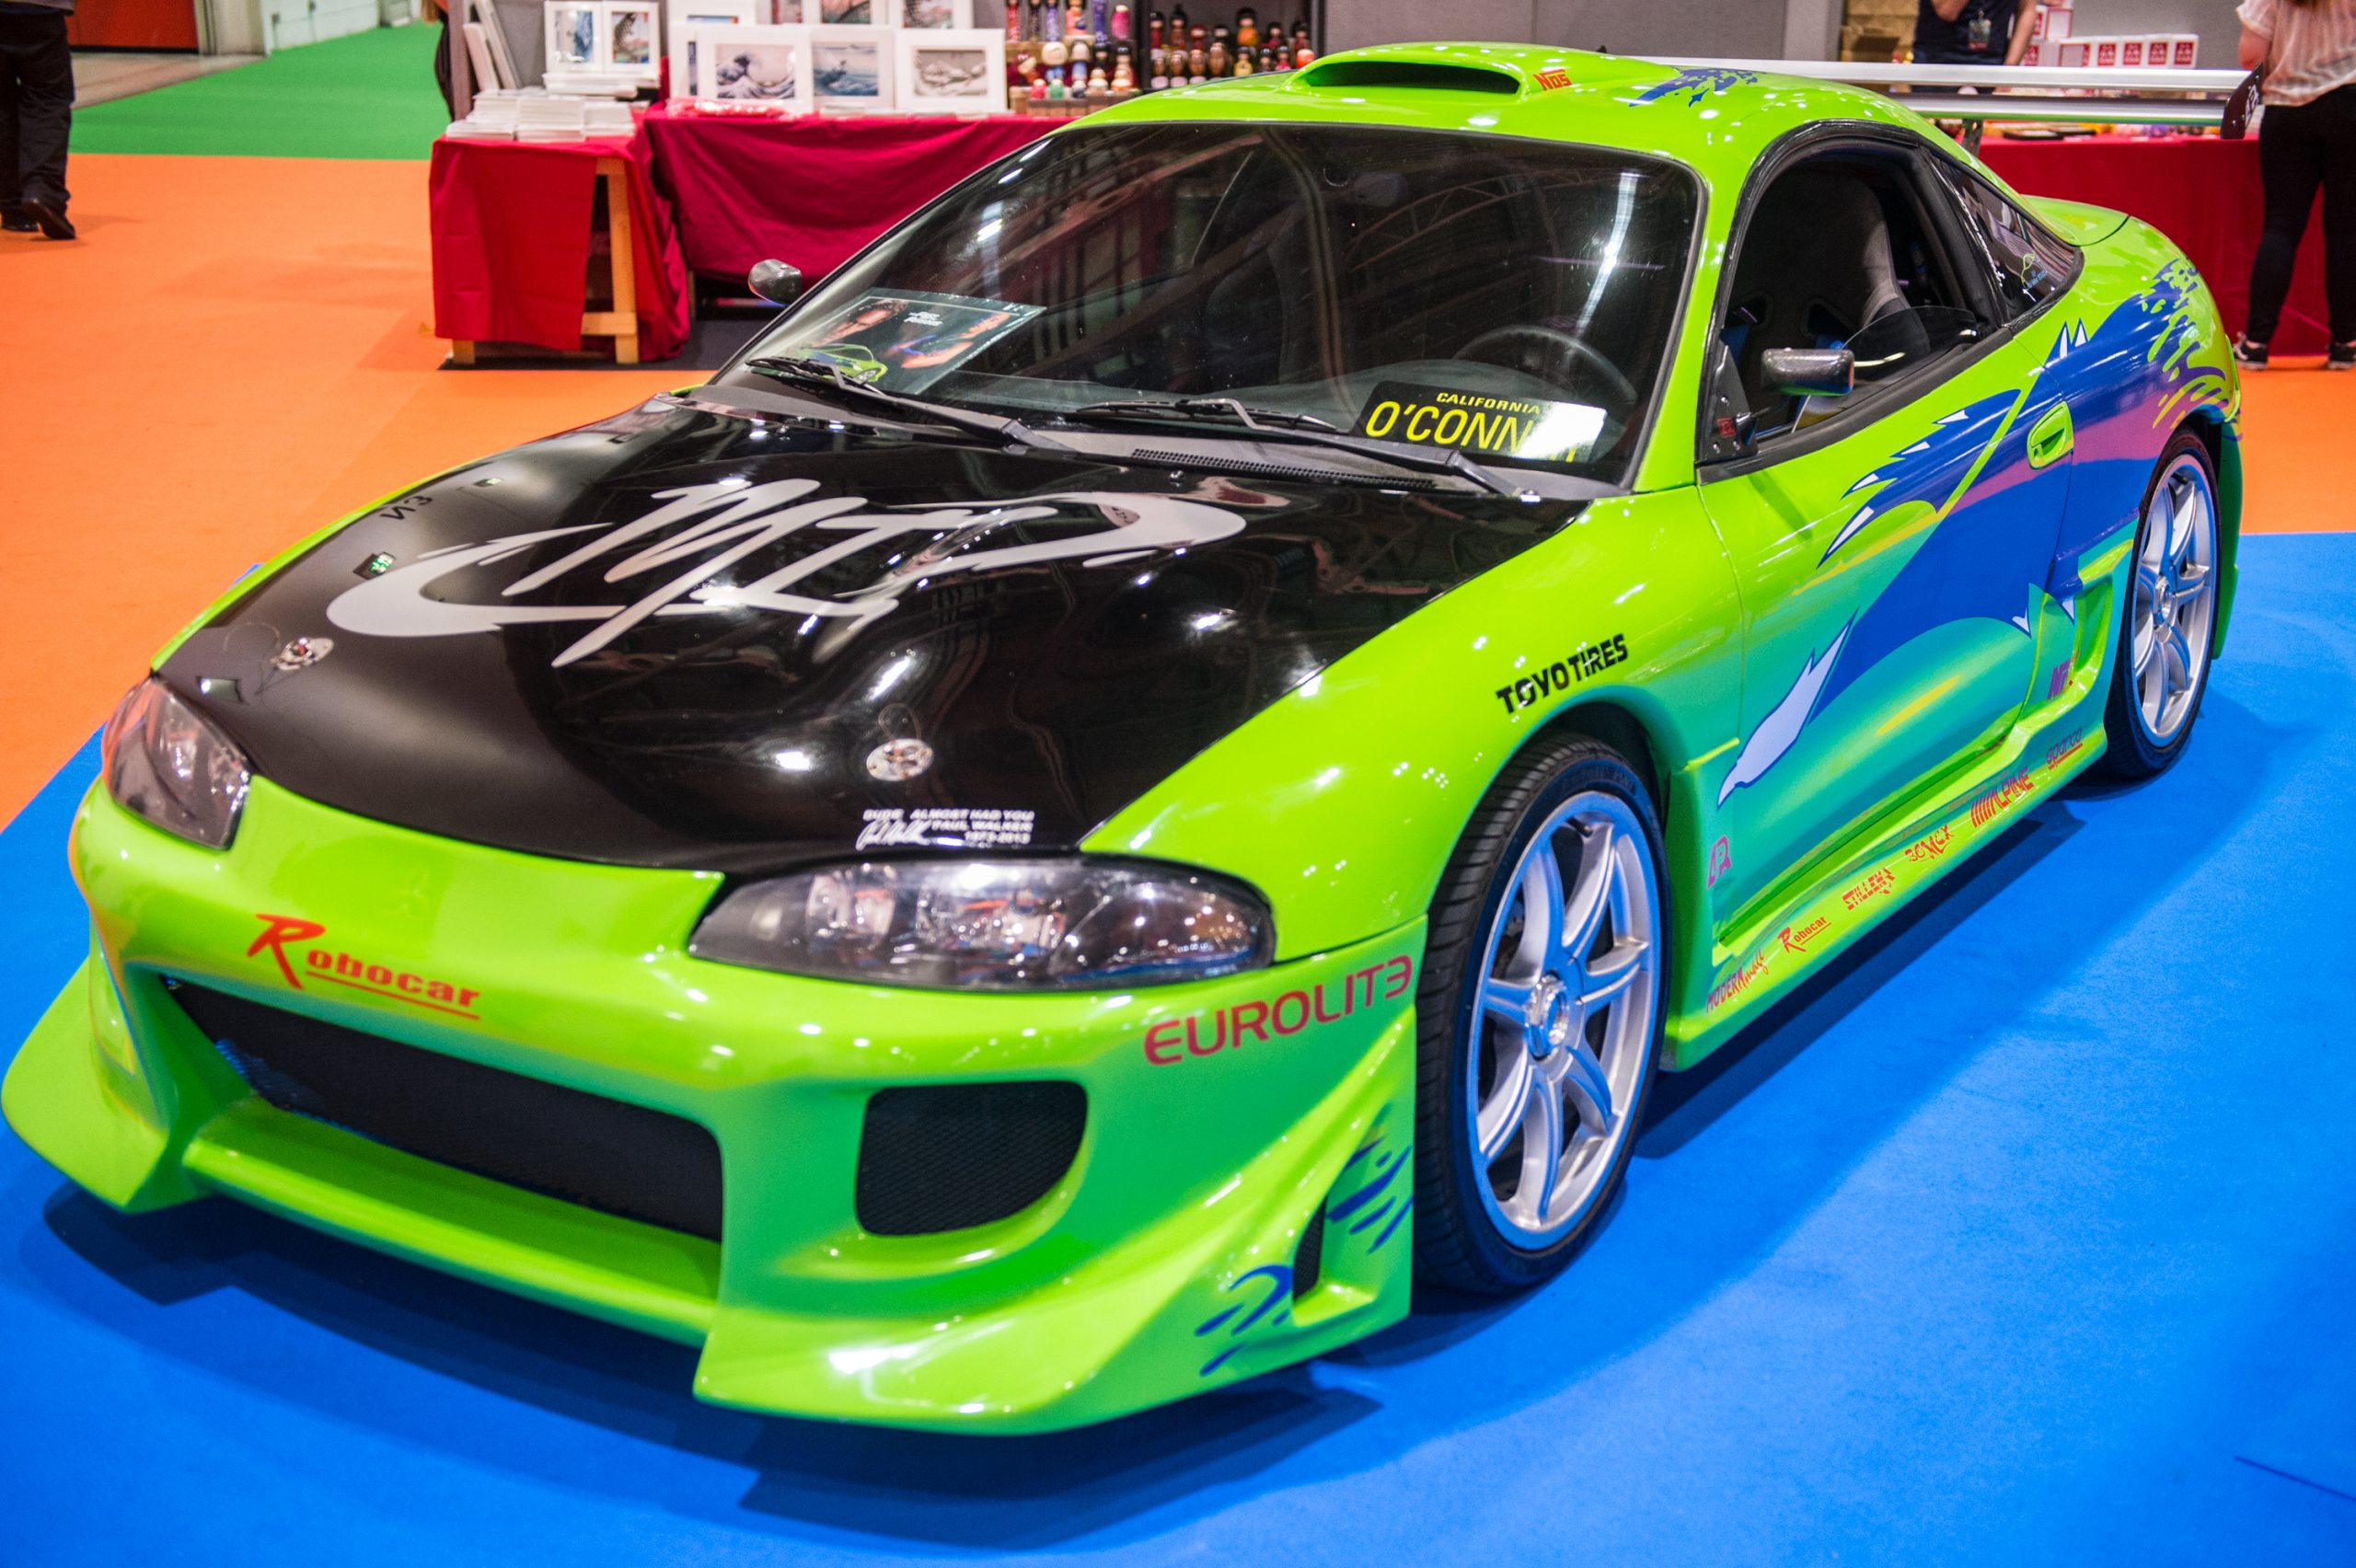 The Mitsubishi Eclipse from Fast and Furious with a bright green livery